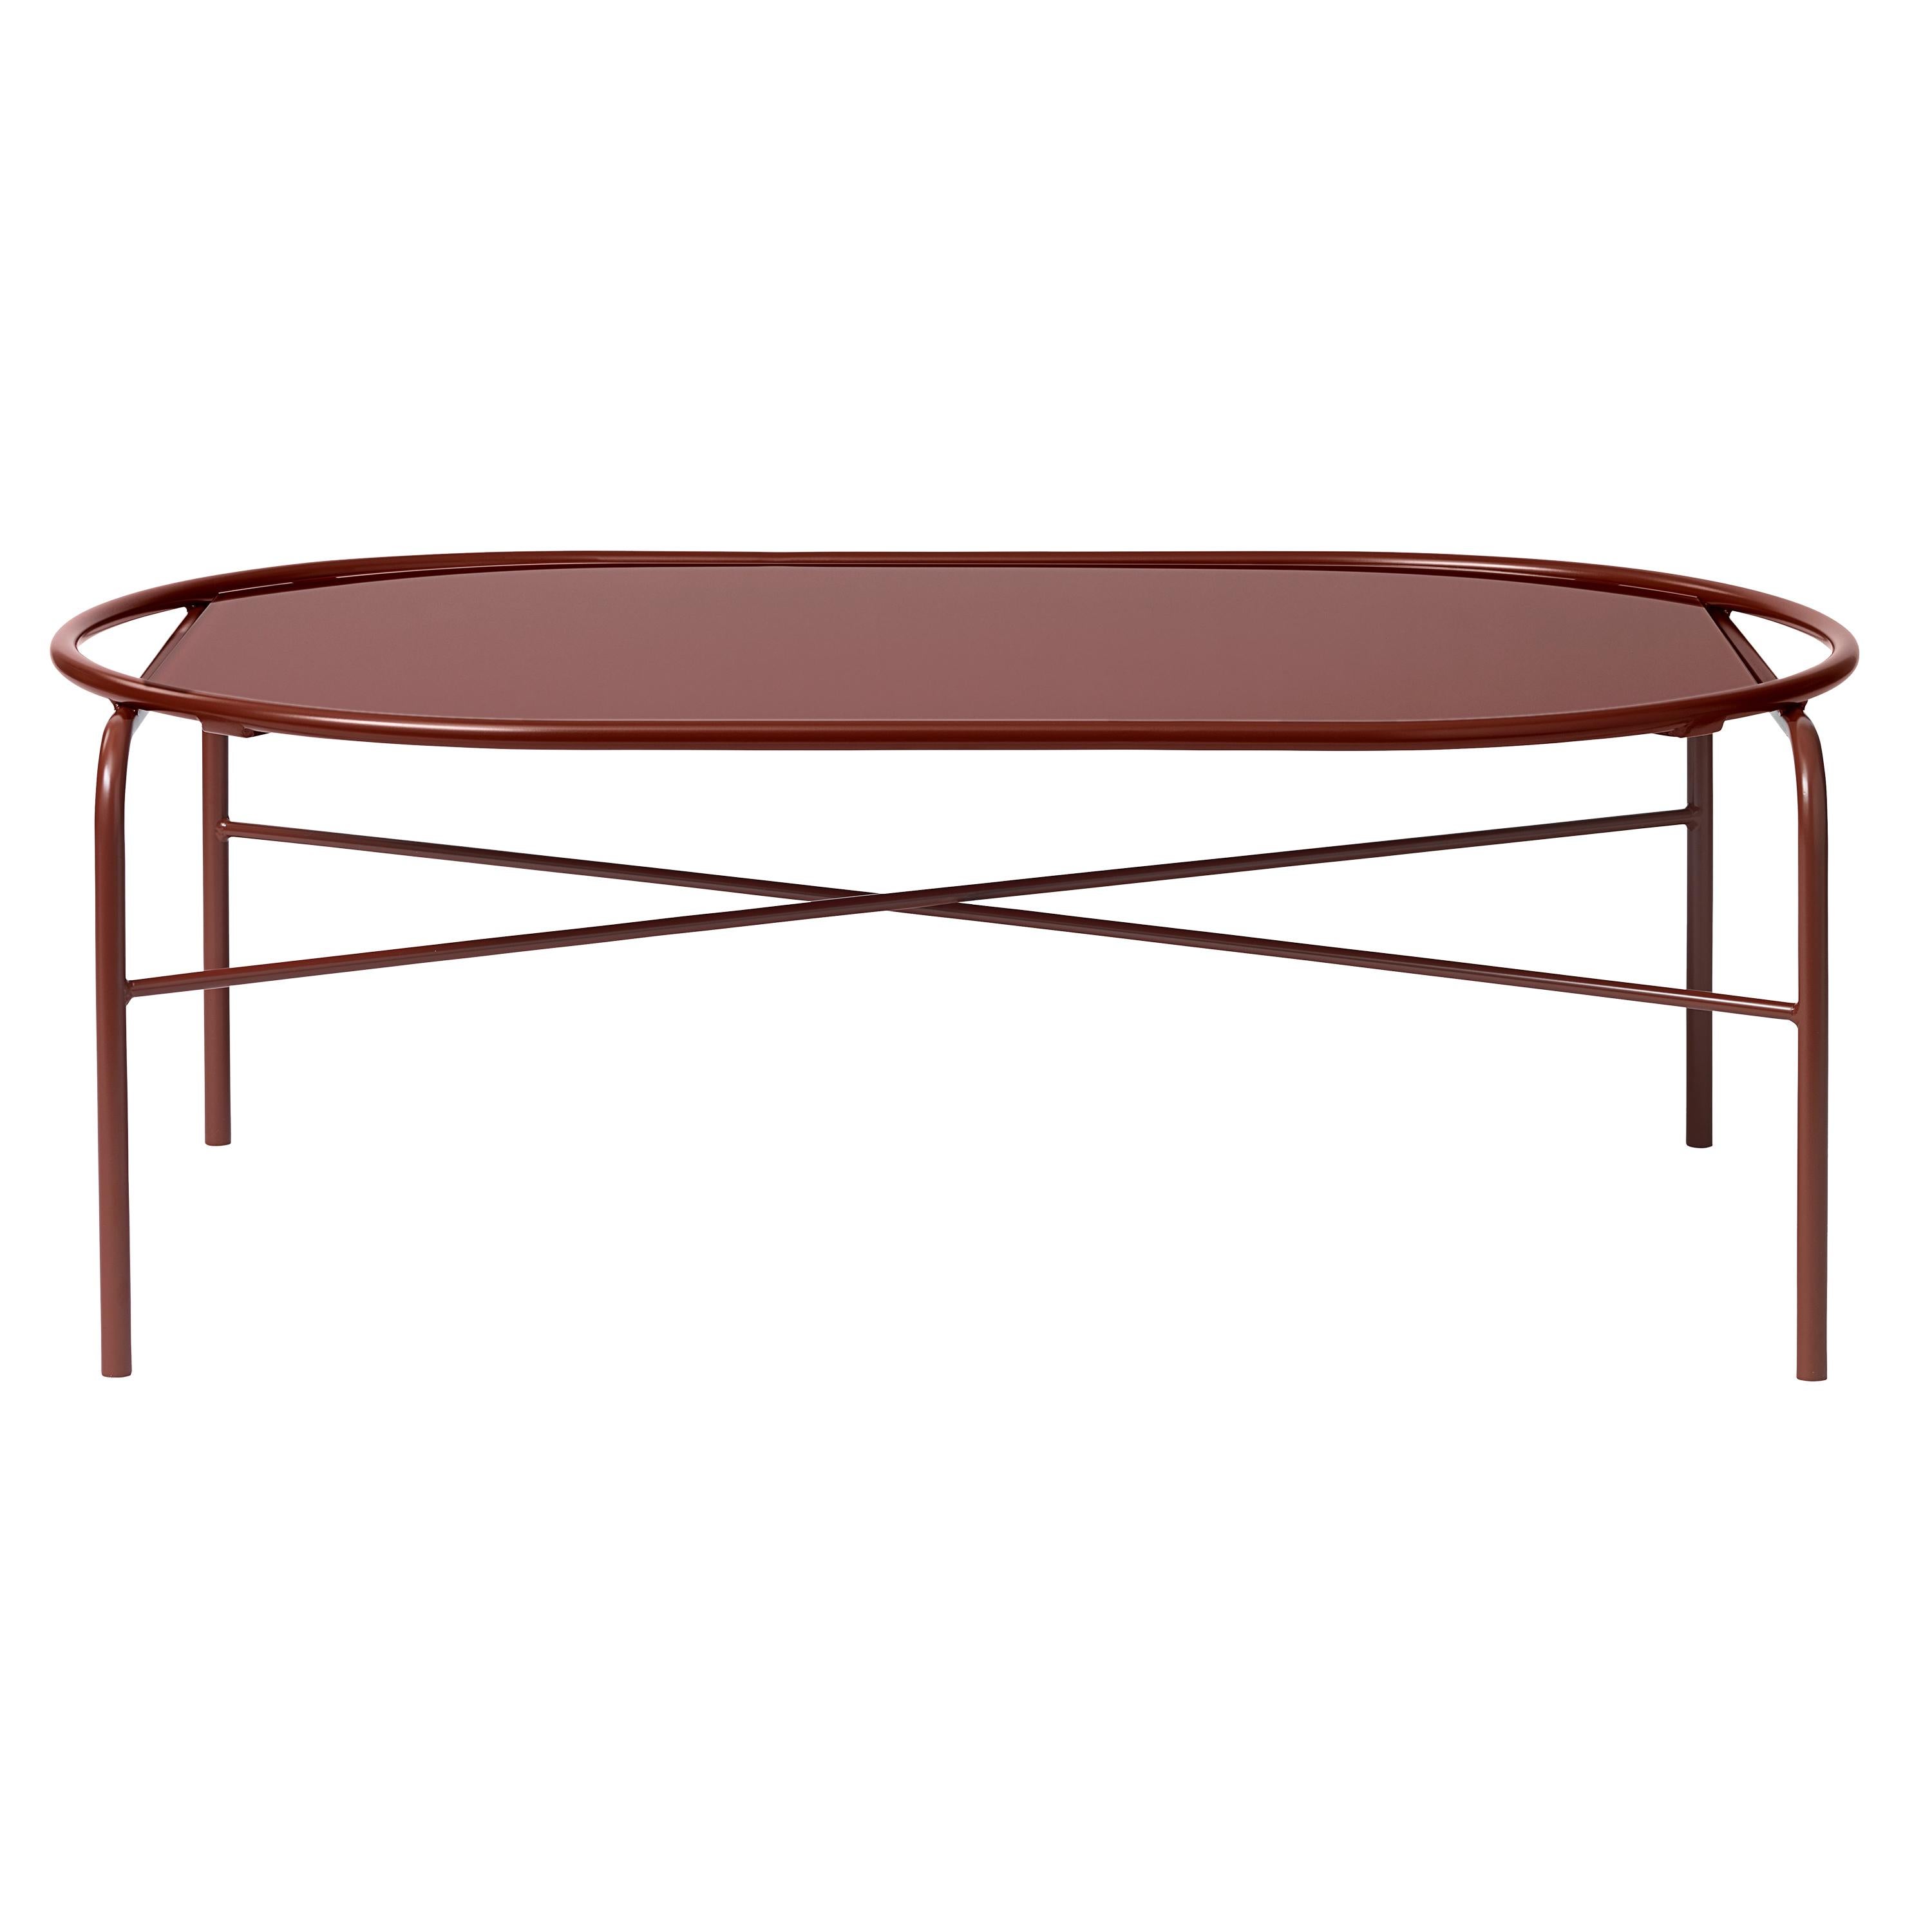 Secant Oval Table in Steel Frame, by Sara Wright Polmar from Warm Nordic